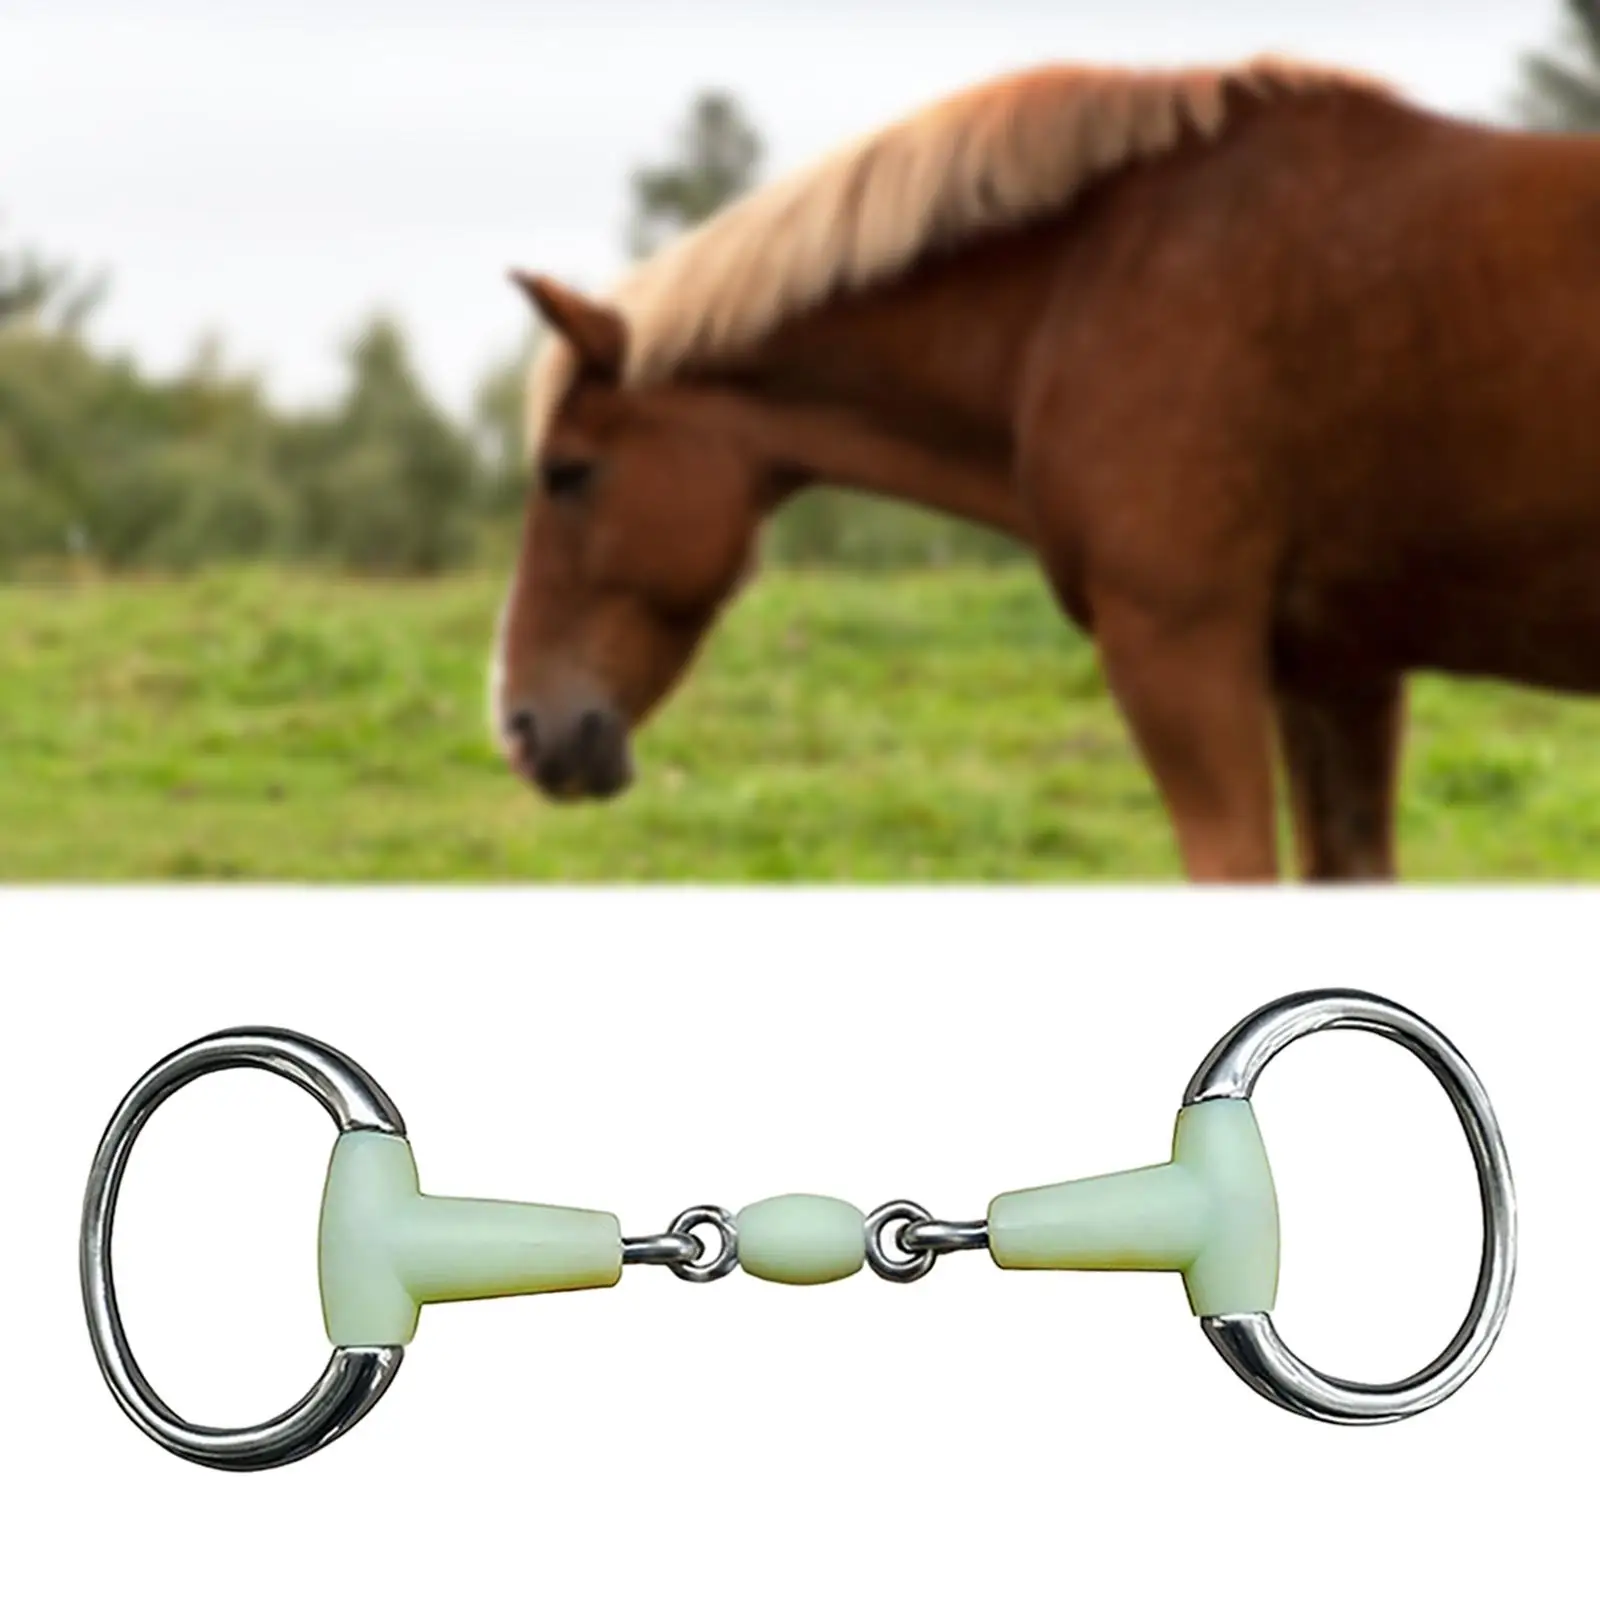 Ultralight Horse Ring Bit Equestrian Accessories for Horse Riding Equipment